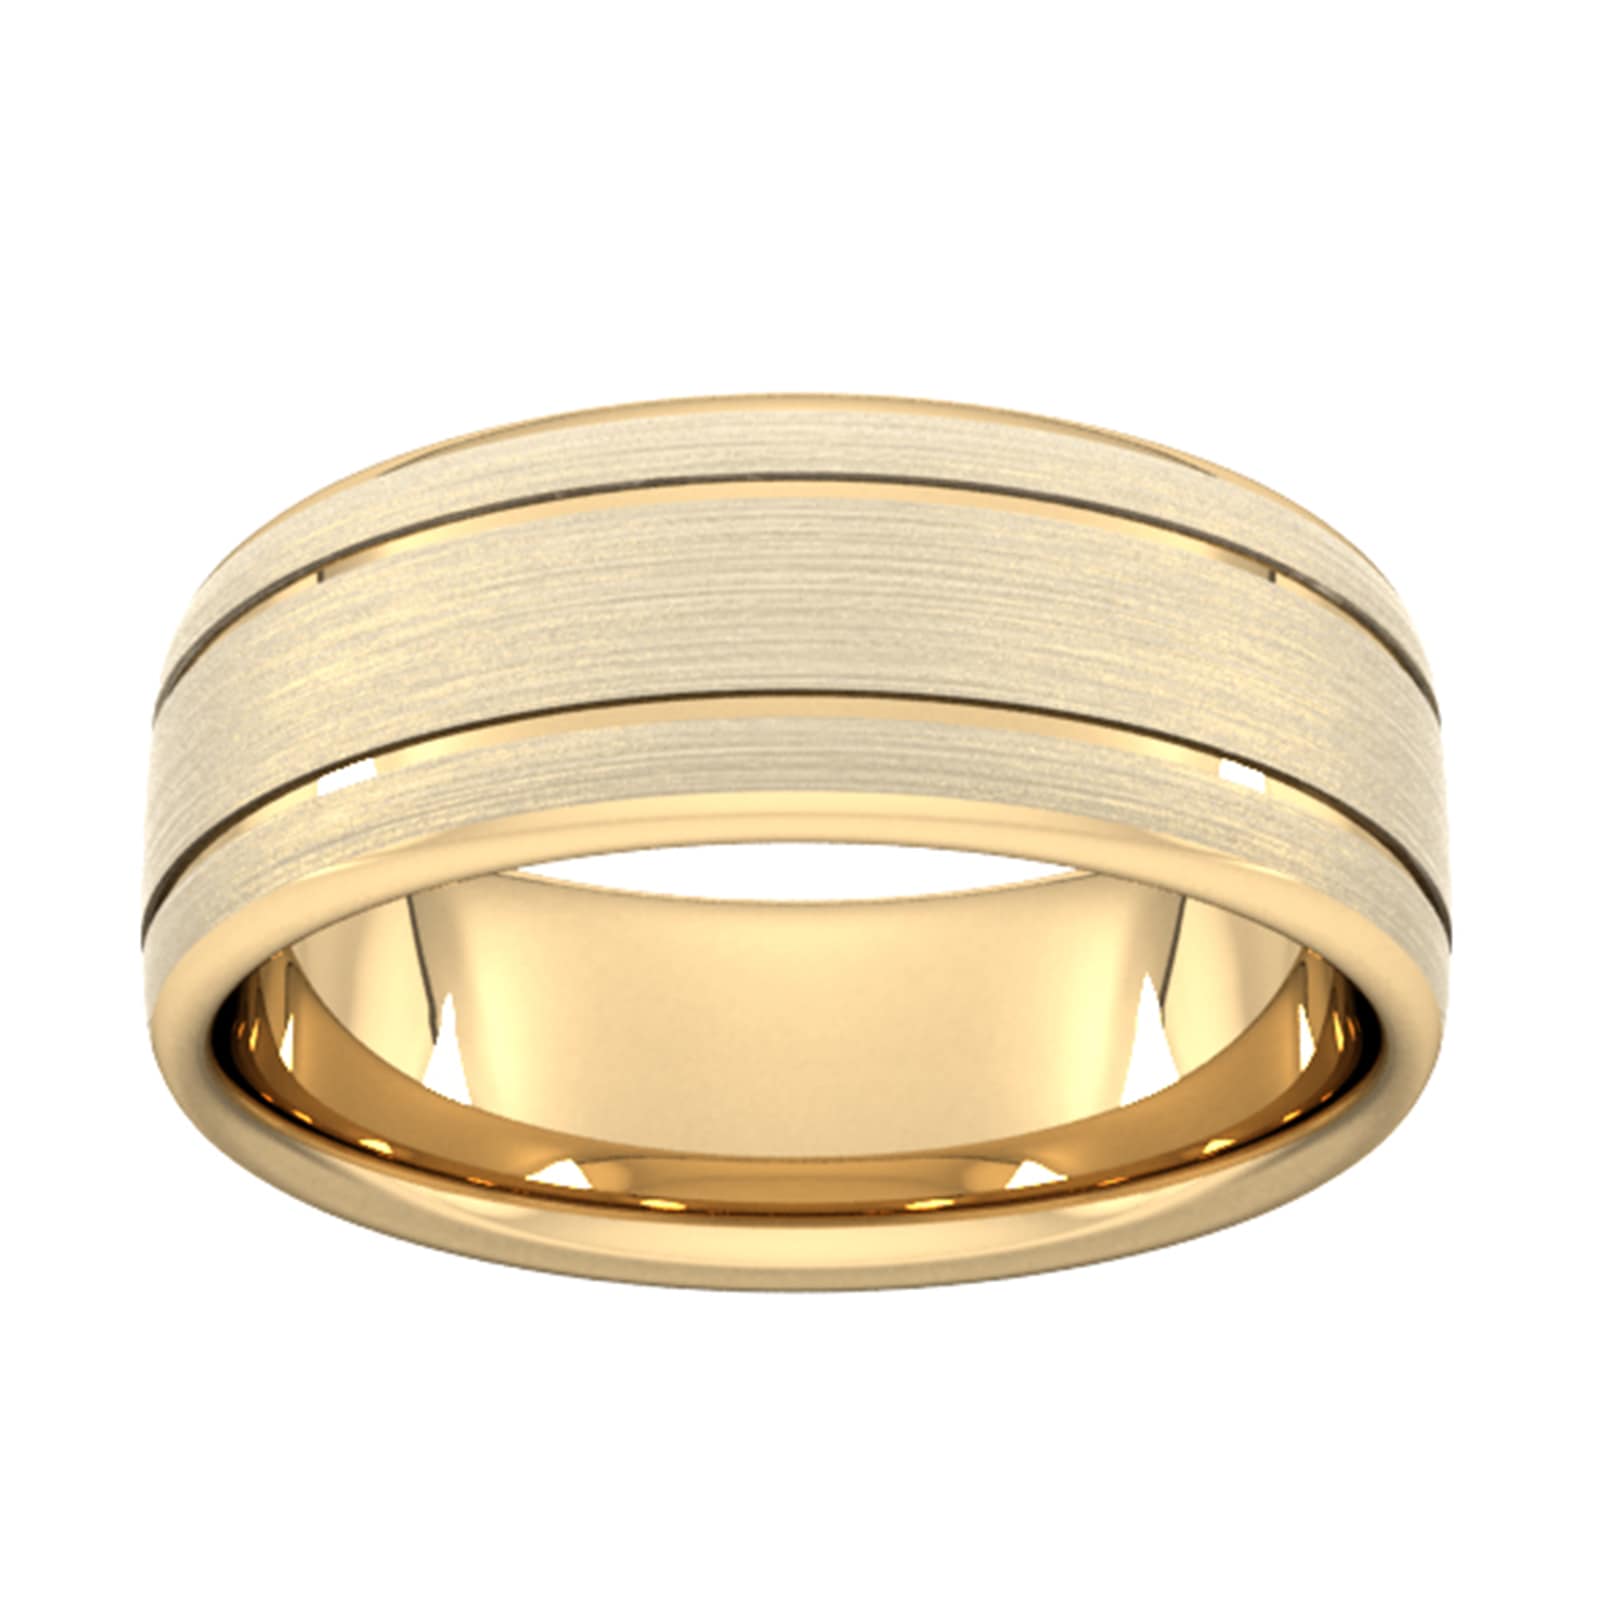 8mm Slight Court Standard Matt Finish With Double Grooves Wedding Ring In 18 Carat Yellow Gold - Ring Size O